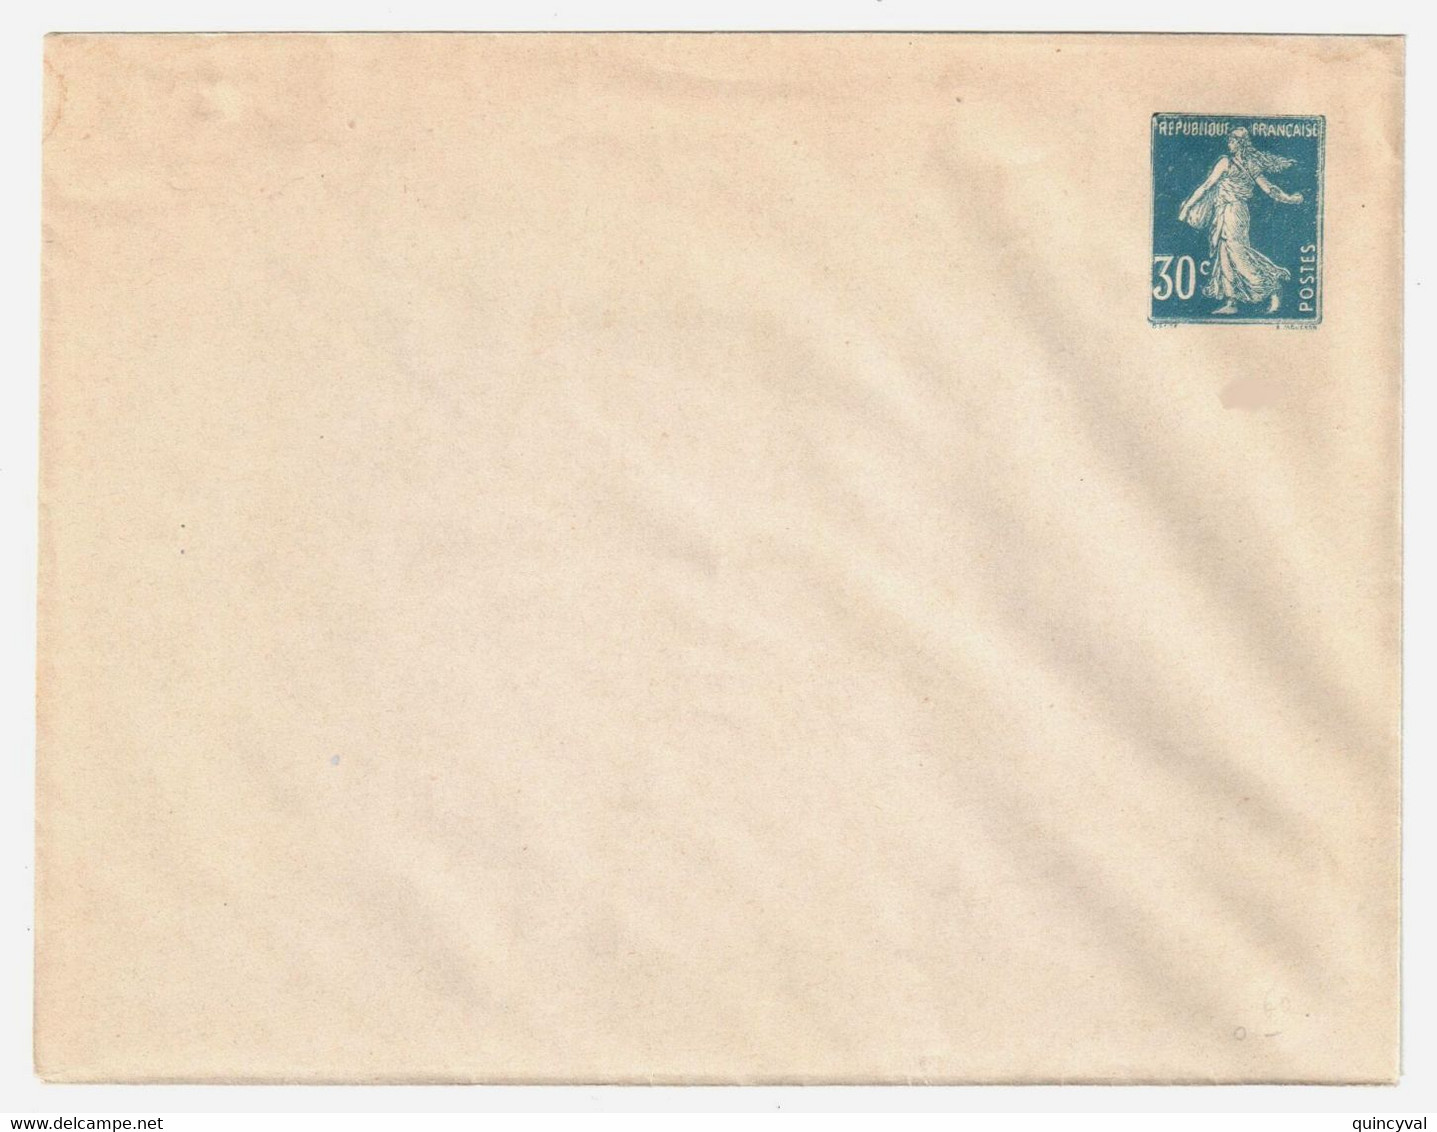 Enveloppe Entier 30c Semeuse Bleu 147 X 112 Storch N6 Yvert 192-E1 Int2rieur Lilas Rose - Standard Covers & Stamped On Demand (before 1995)